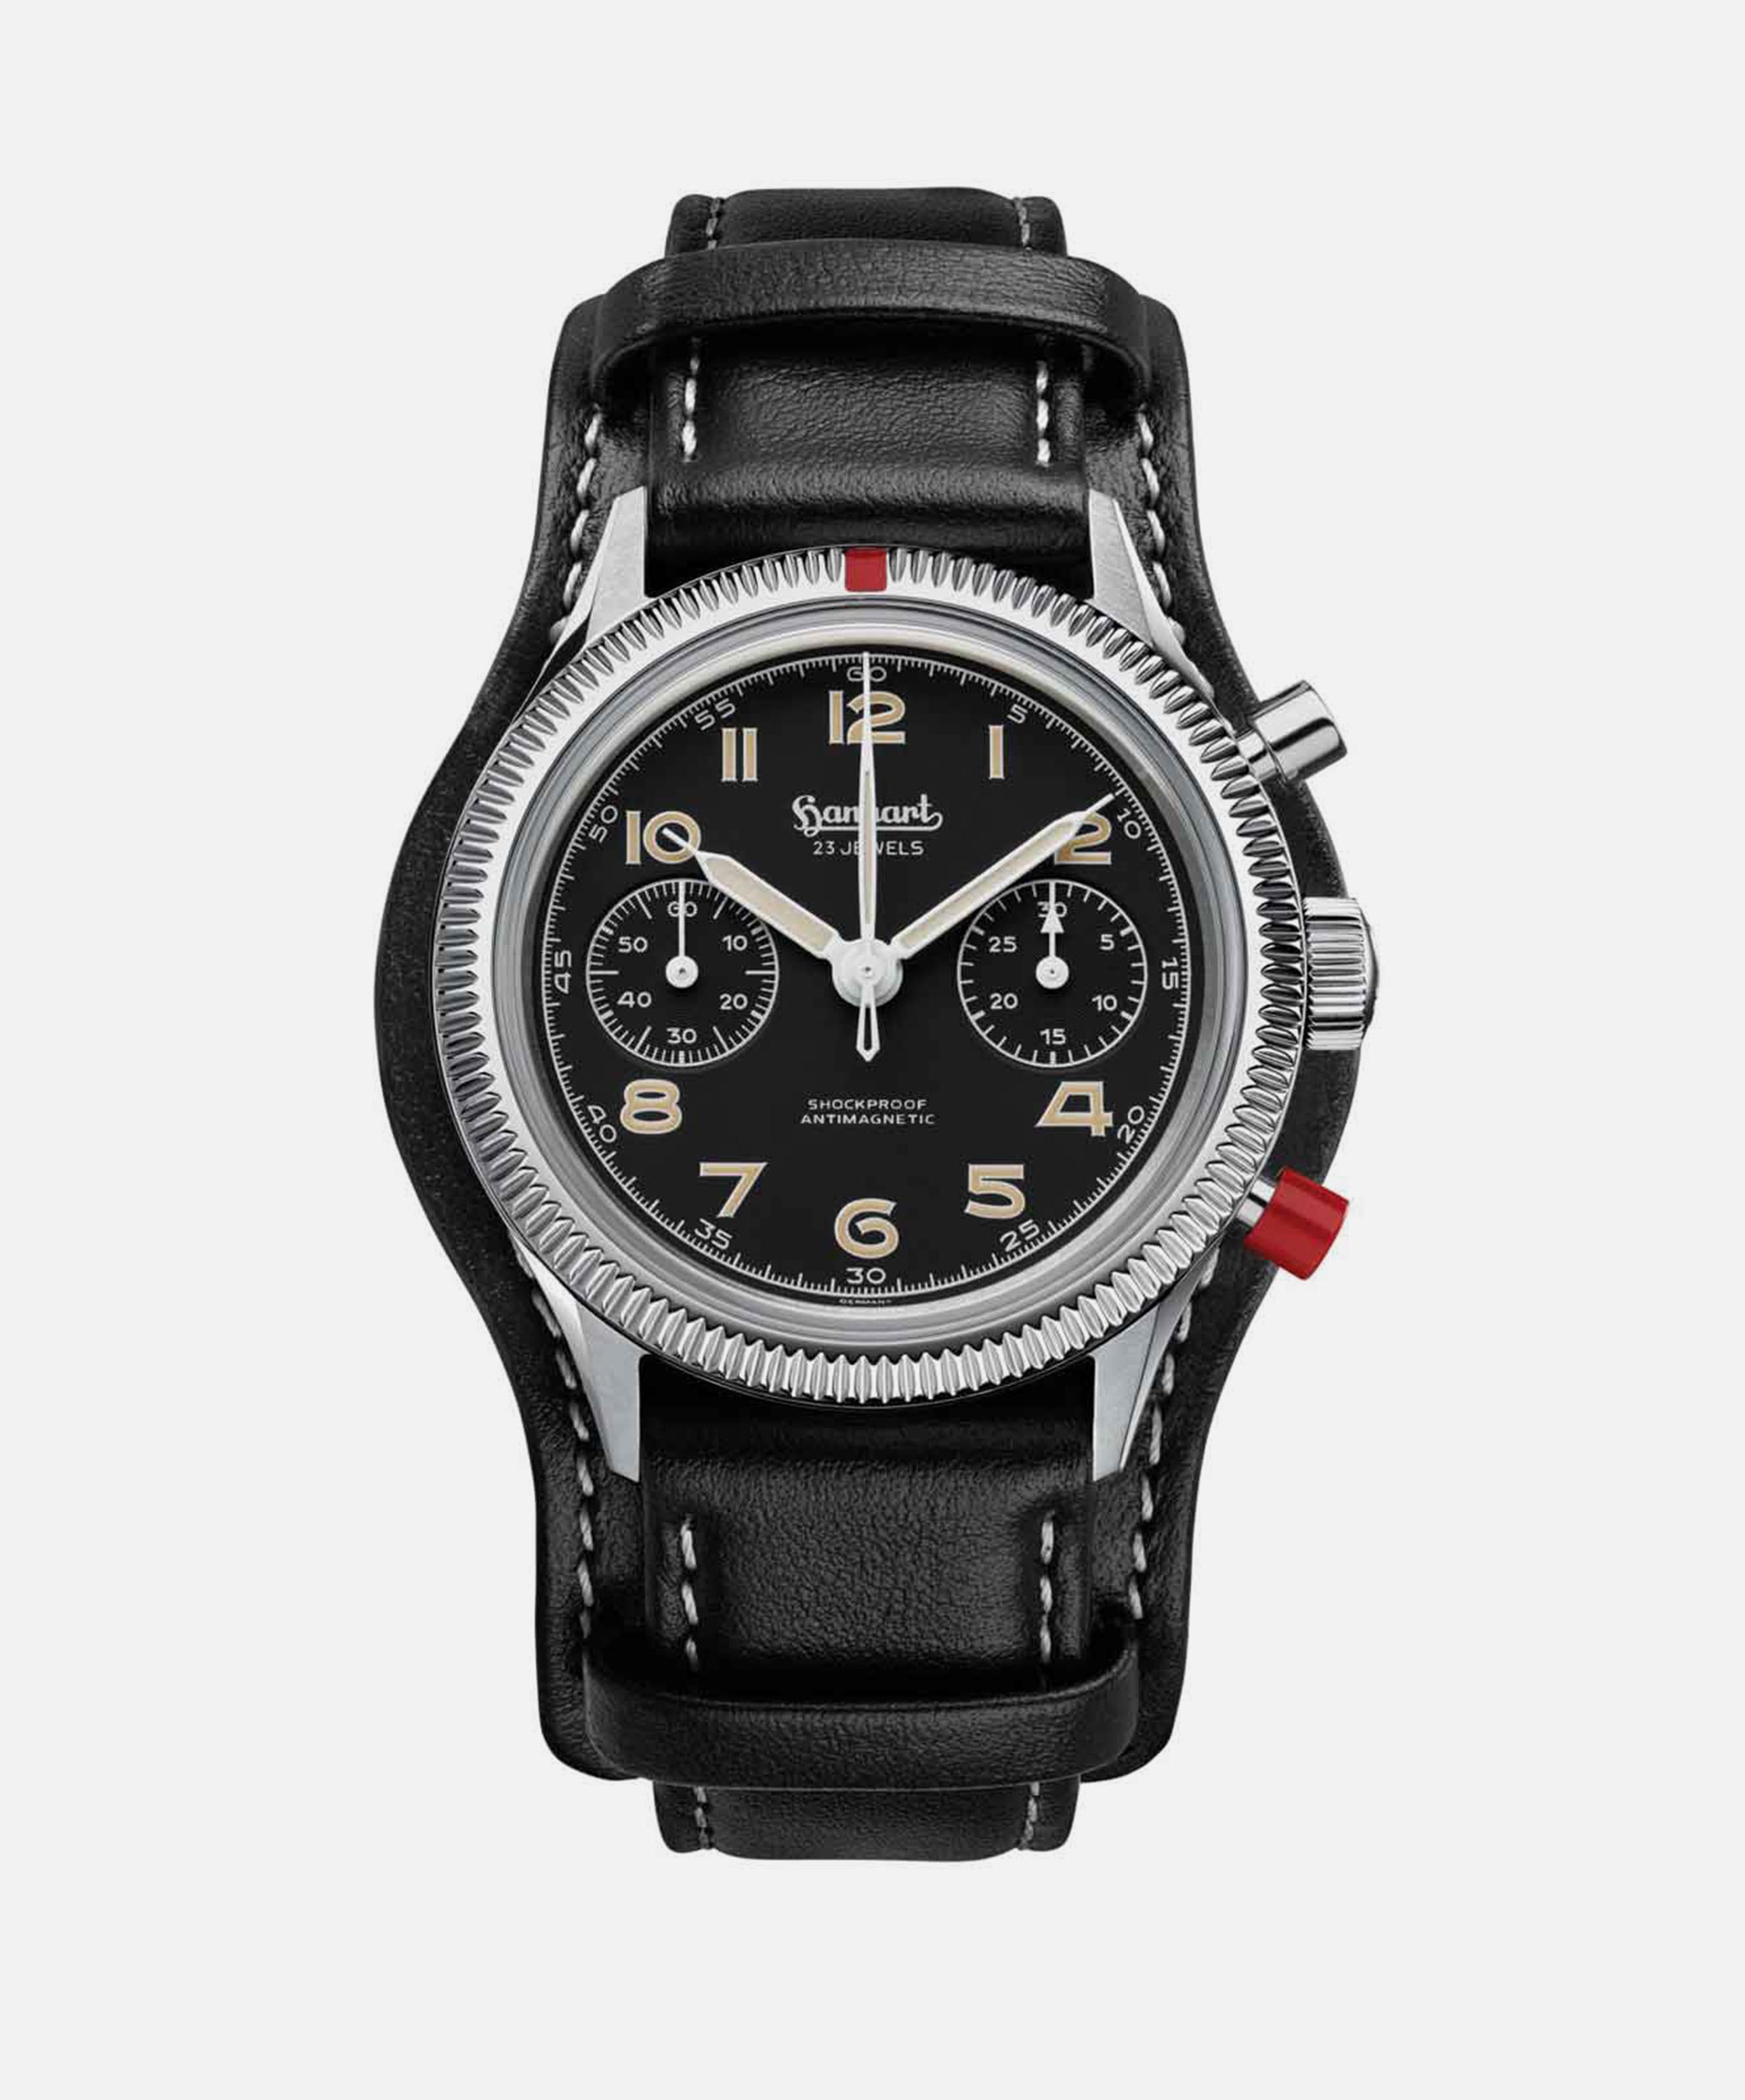 Hanhart Reveals the 417 ES Red Lion, a Pilot’s Chrono with Vintage Inspired Proportions